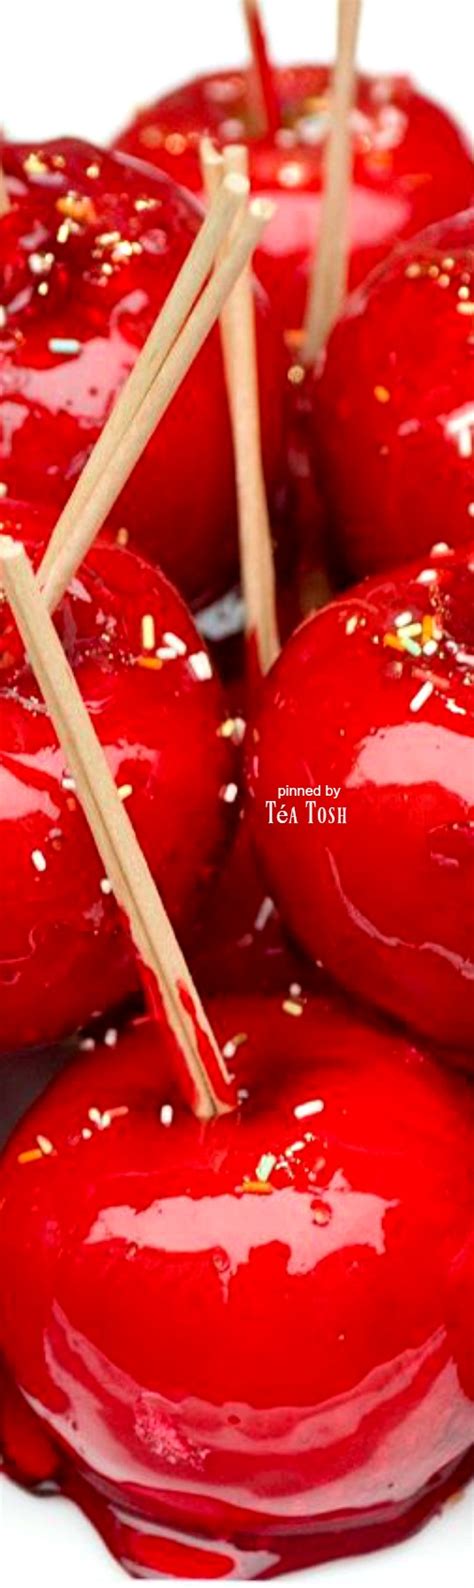 Homemade Cinnamon Candy Apples Recipe Candy Apples Apple Recipes